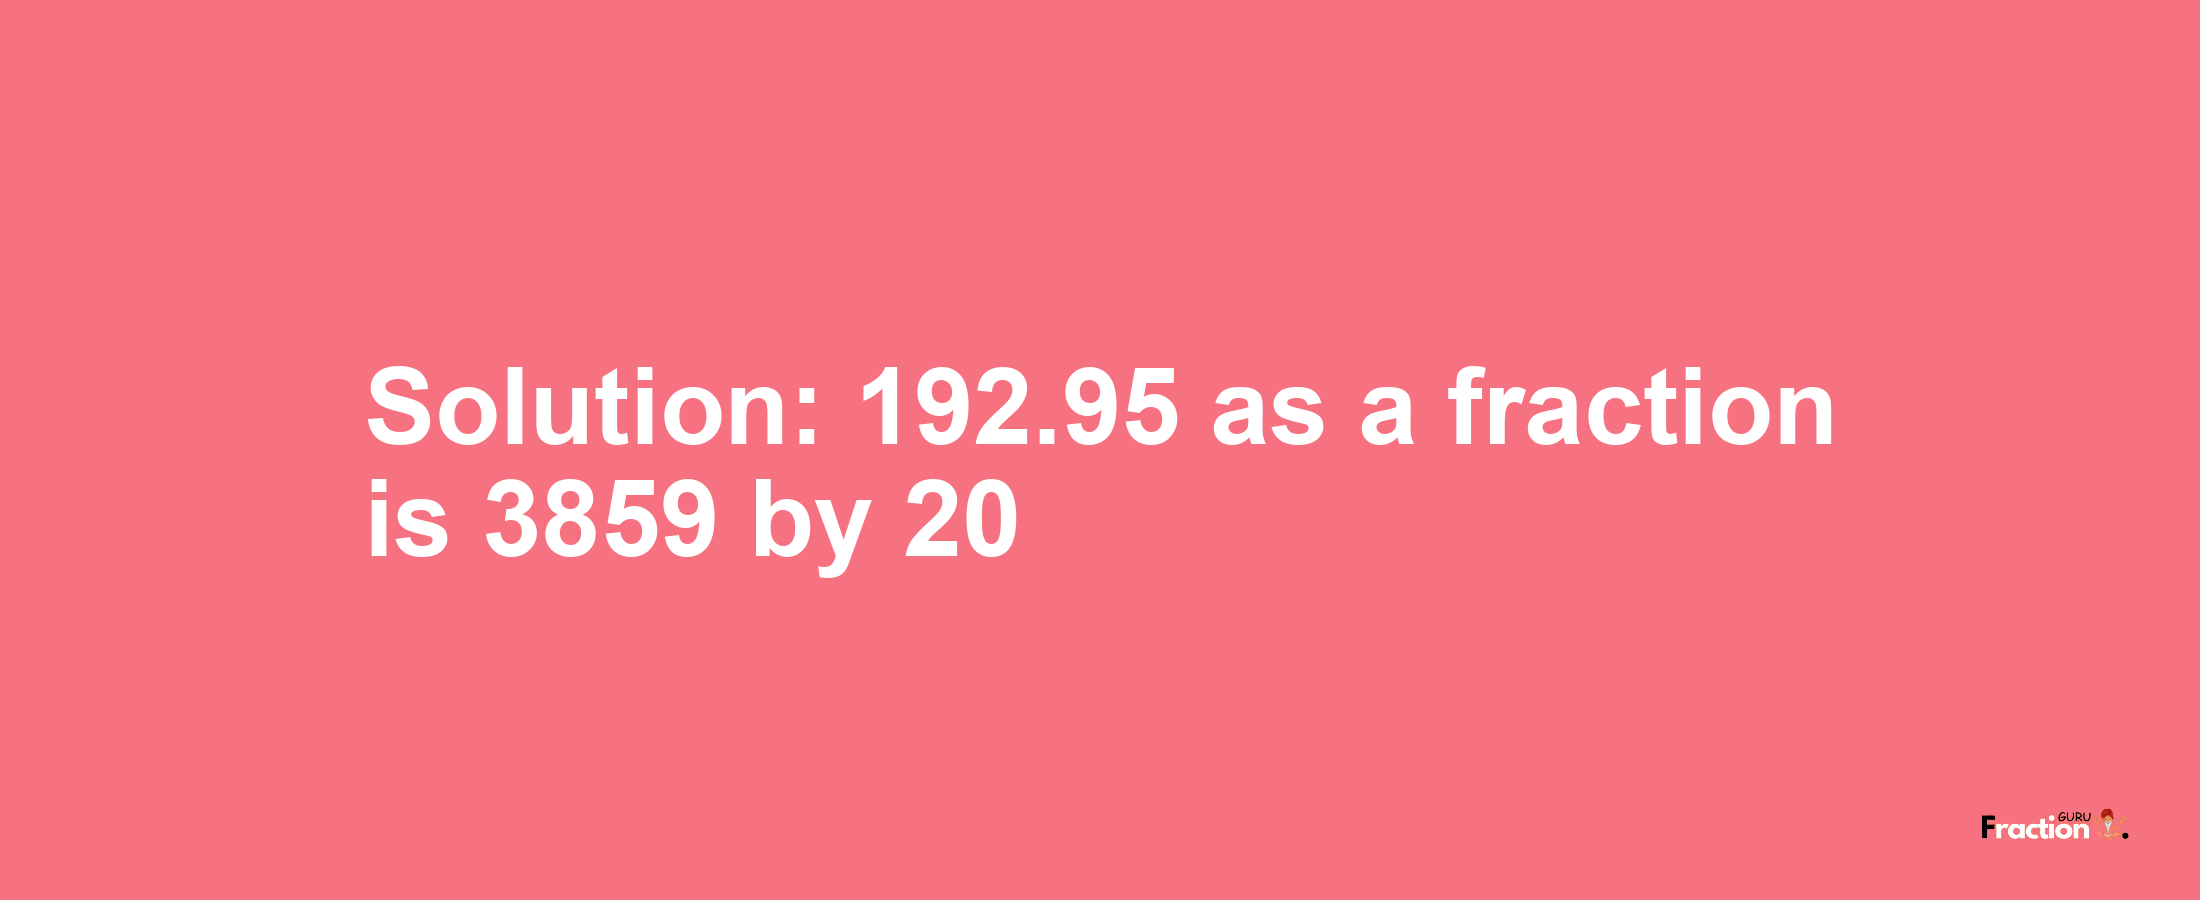 Solution:192.95 as a fraction is 3859/20